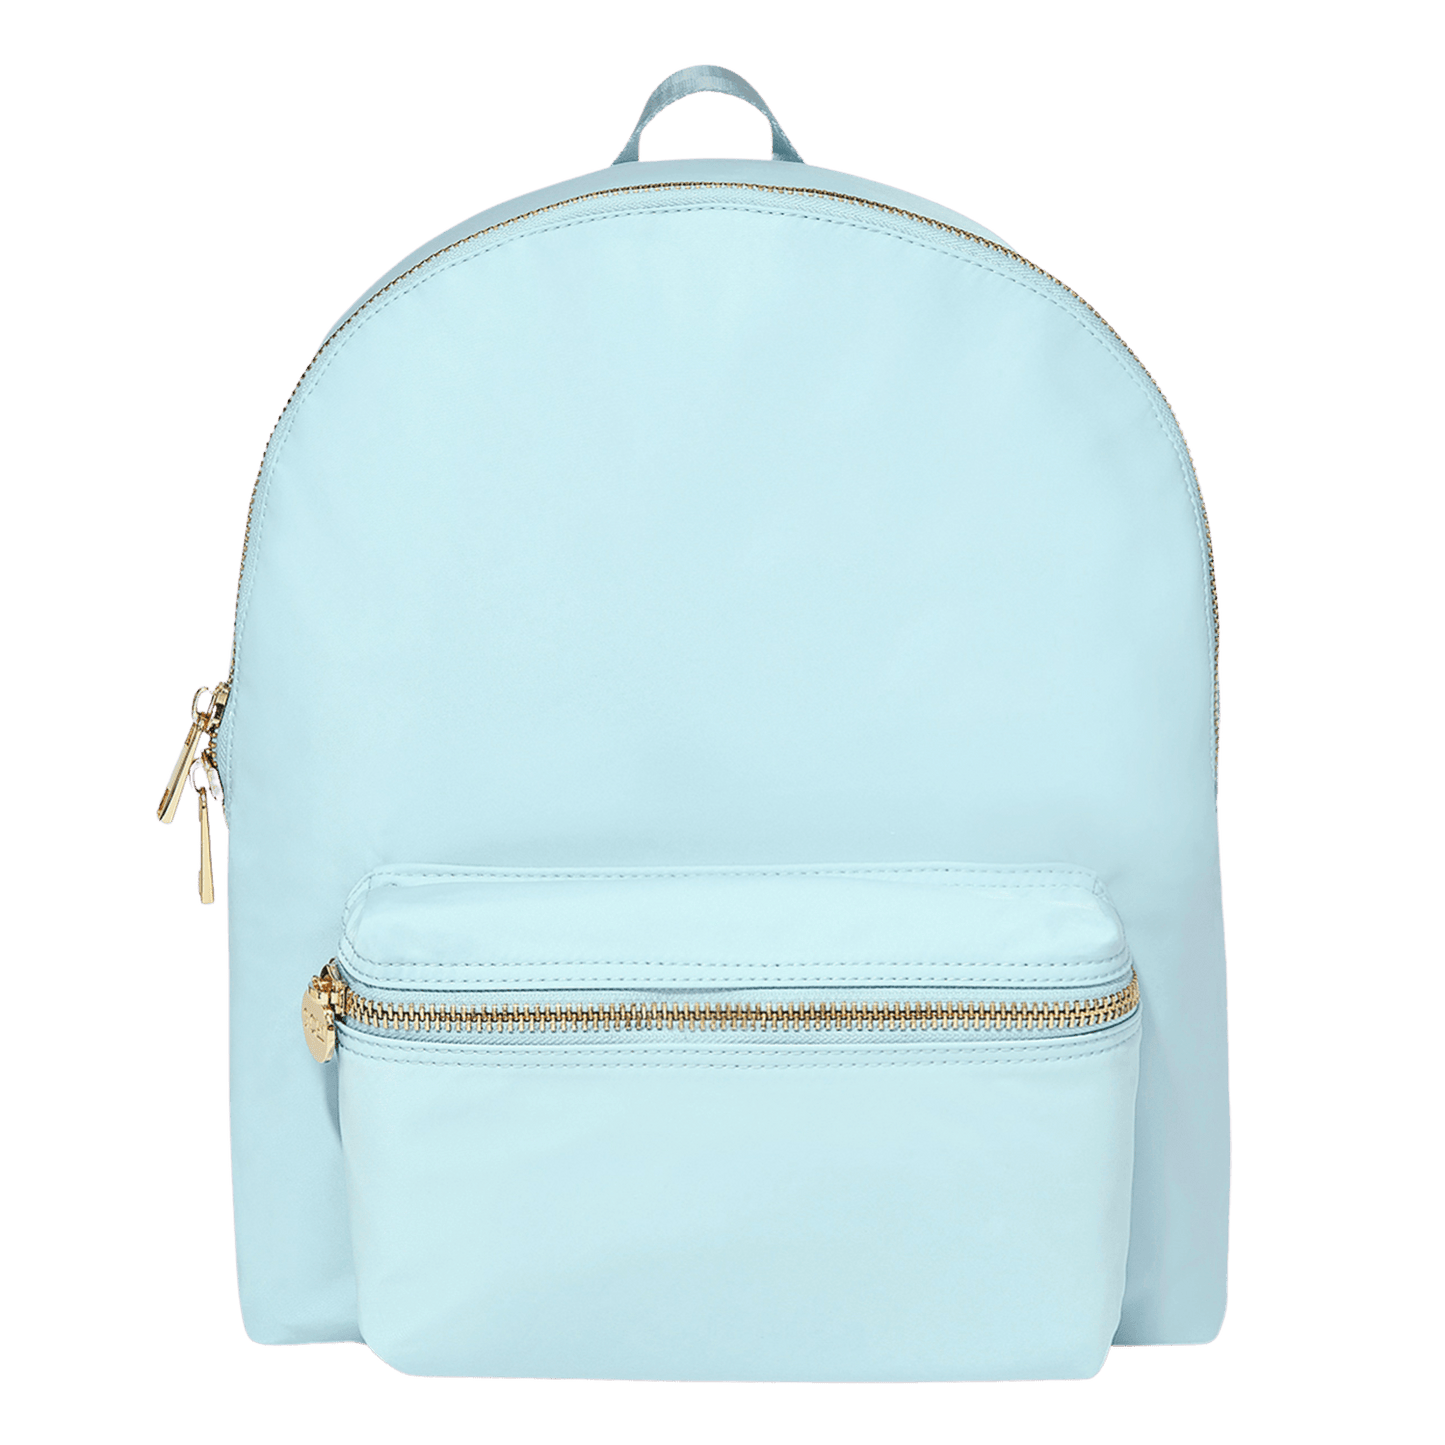 Classic Backpack Tennis Bag - Made in Italy, waterproof leather